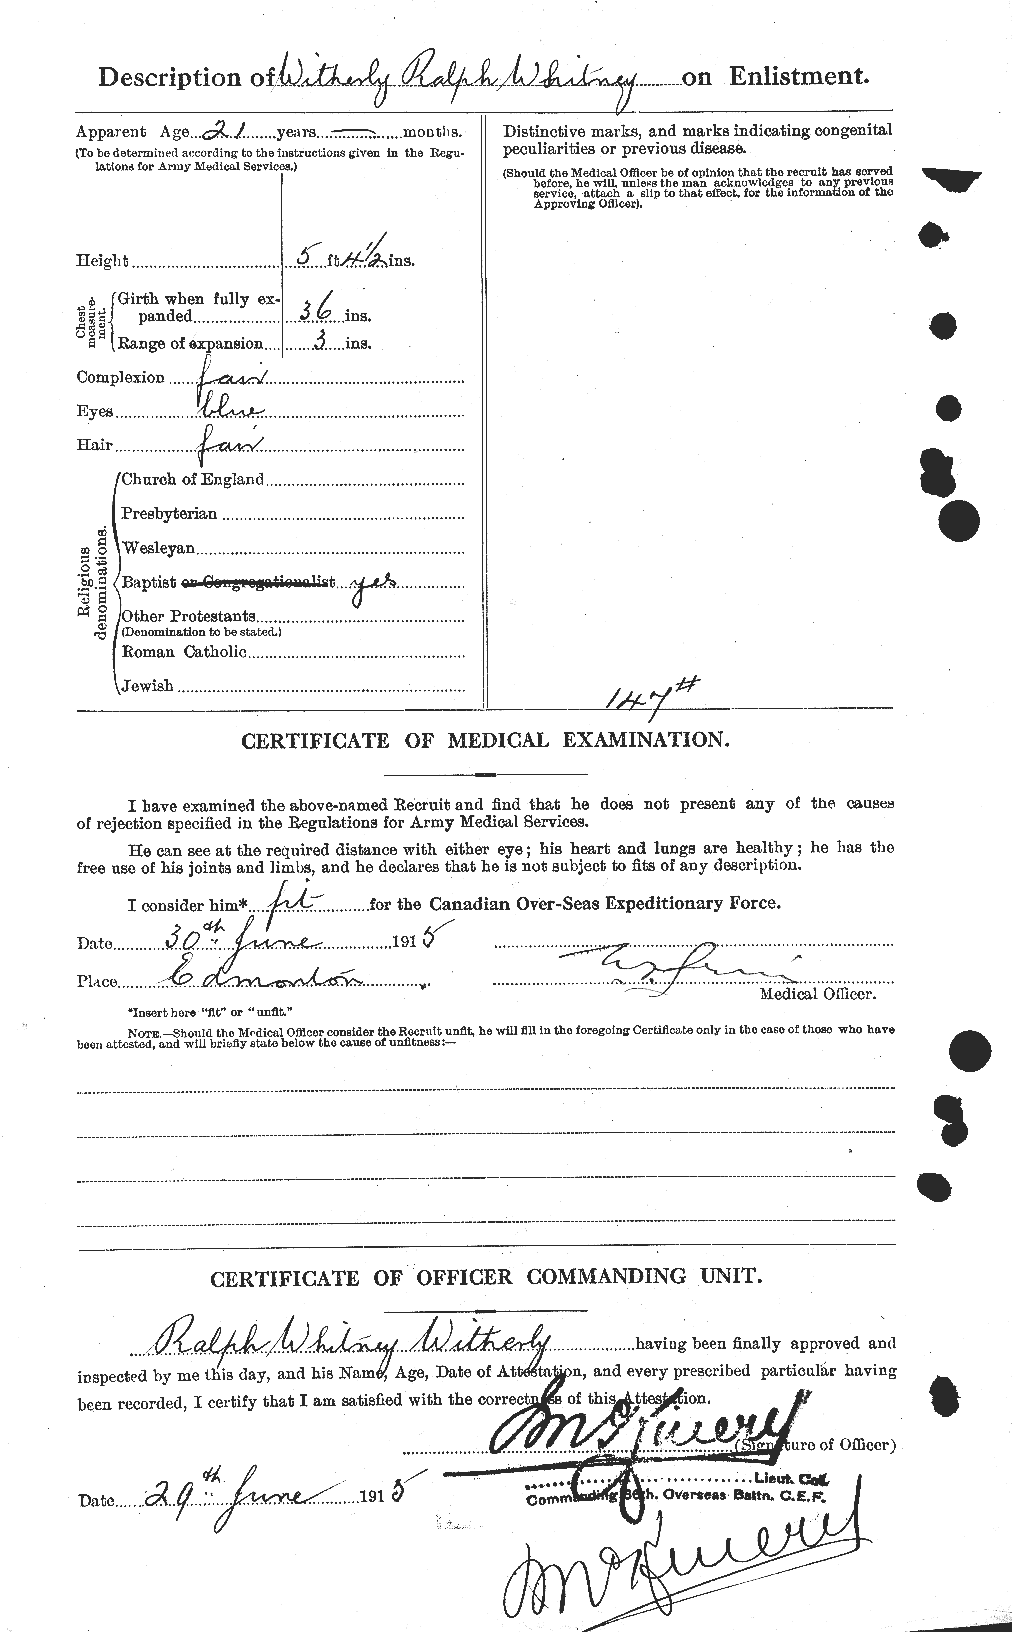 Personnel Records of the First World War - CEF 679945b